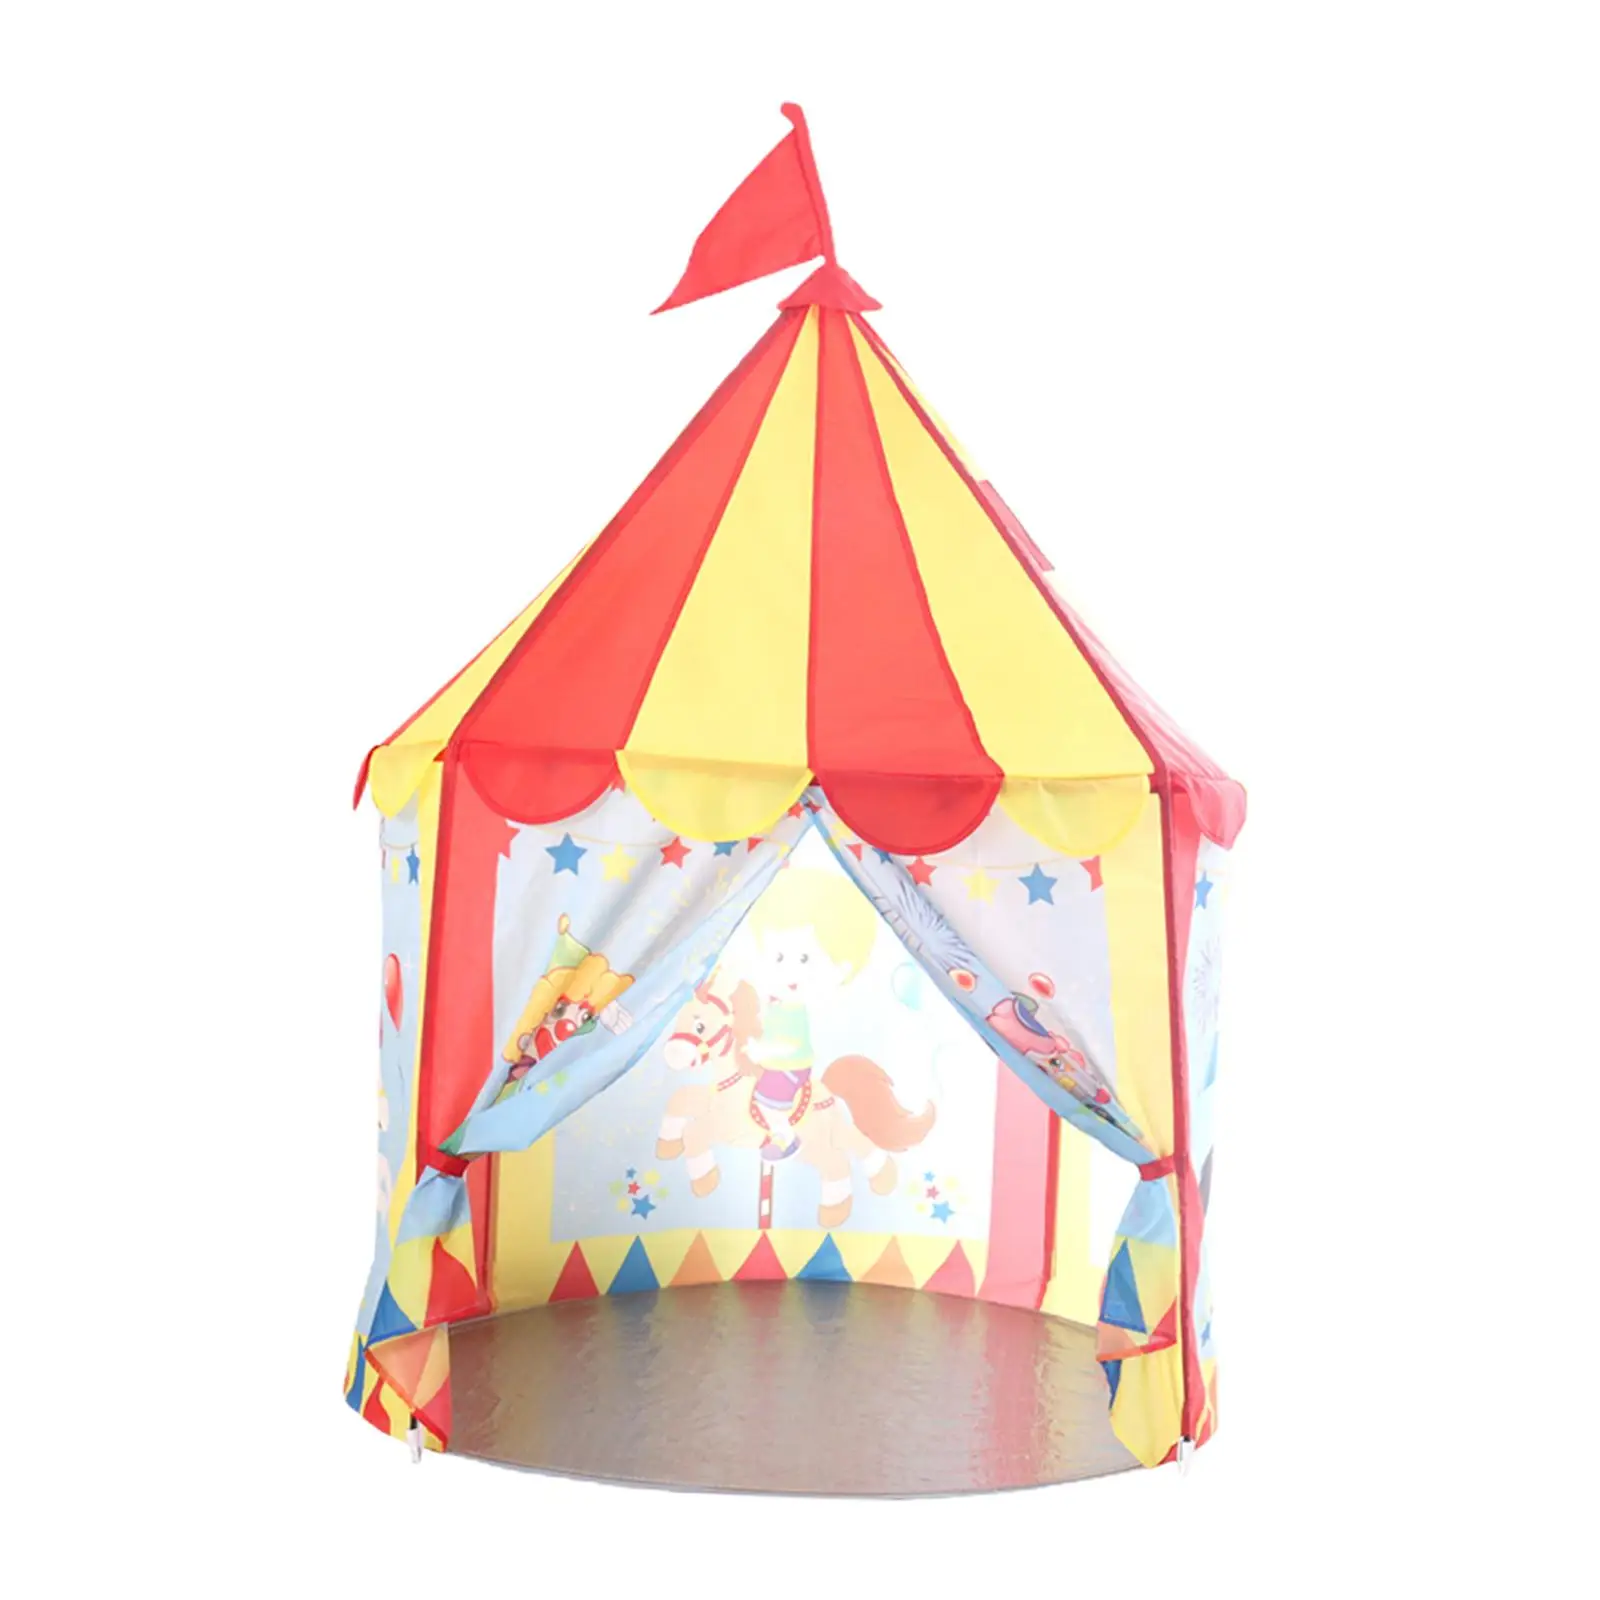 Play Tent House for Boys Girls Easy to Assemble Foldable Birthday Gift Kids Playhouse for Games camping home